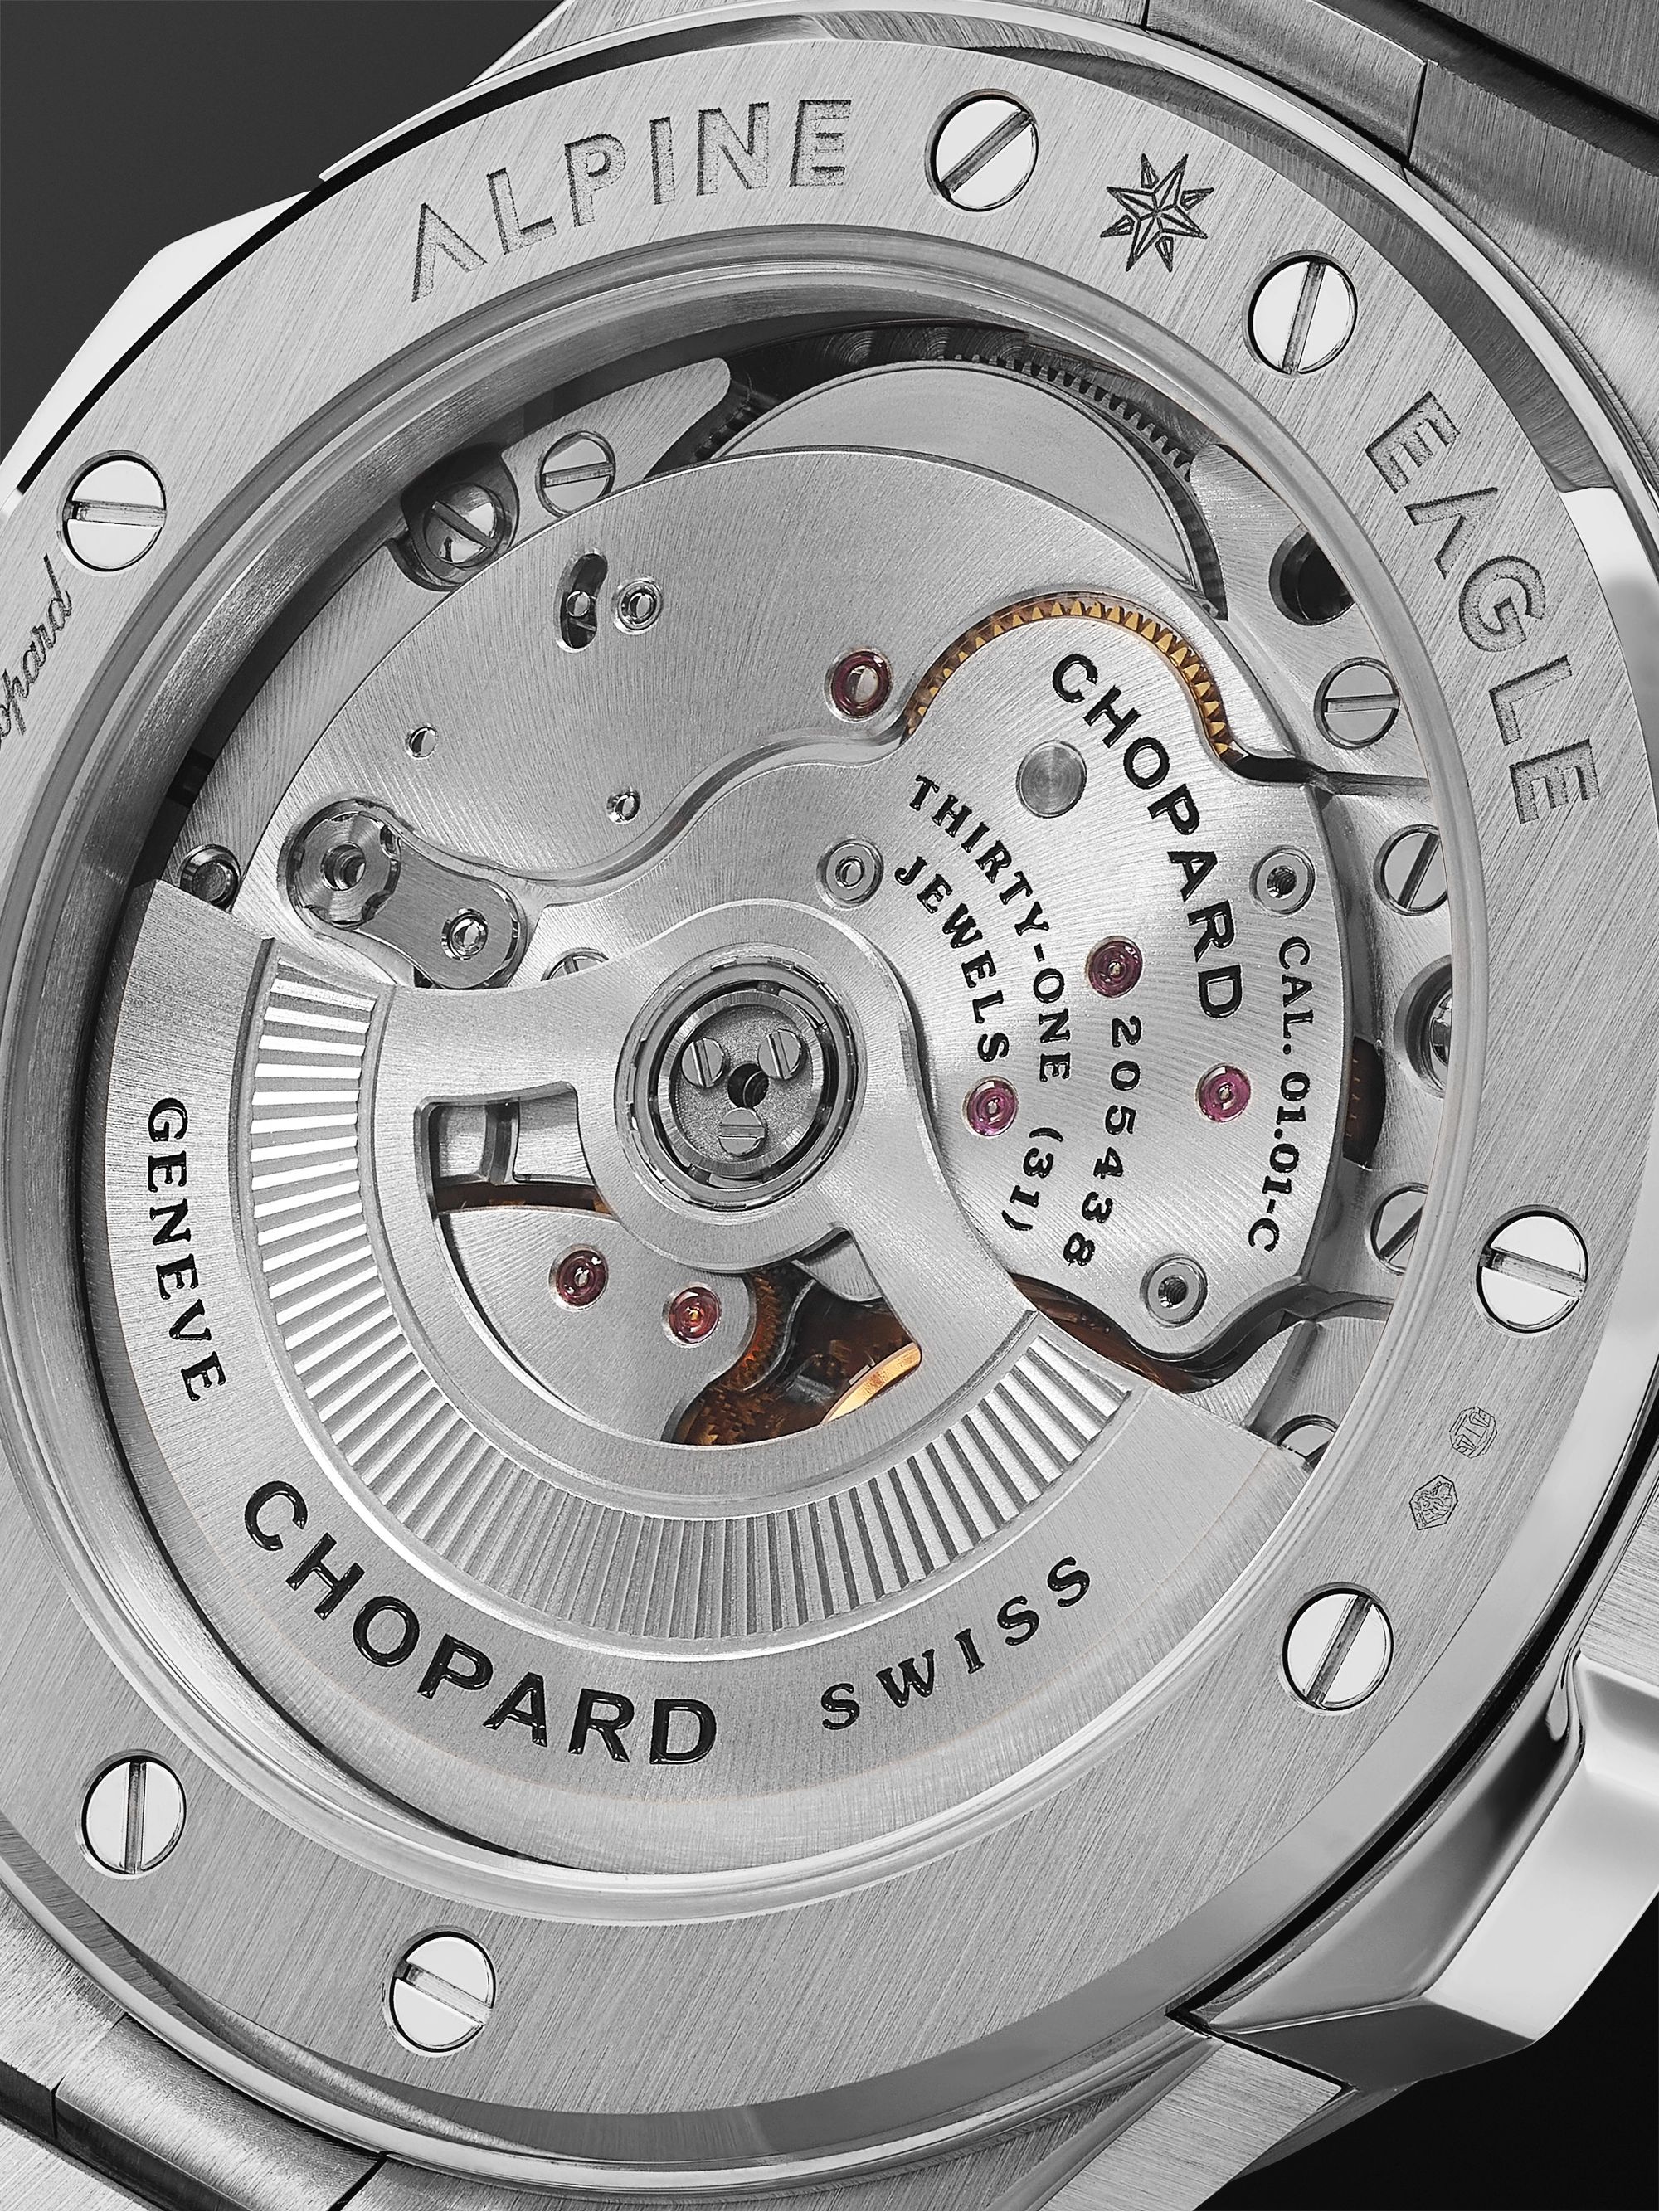 CHOPARD Alpine Eagle Large Automatic 41mm Lucent Steel Watch, Ref. No. 298600-3001